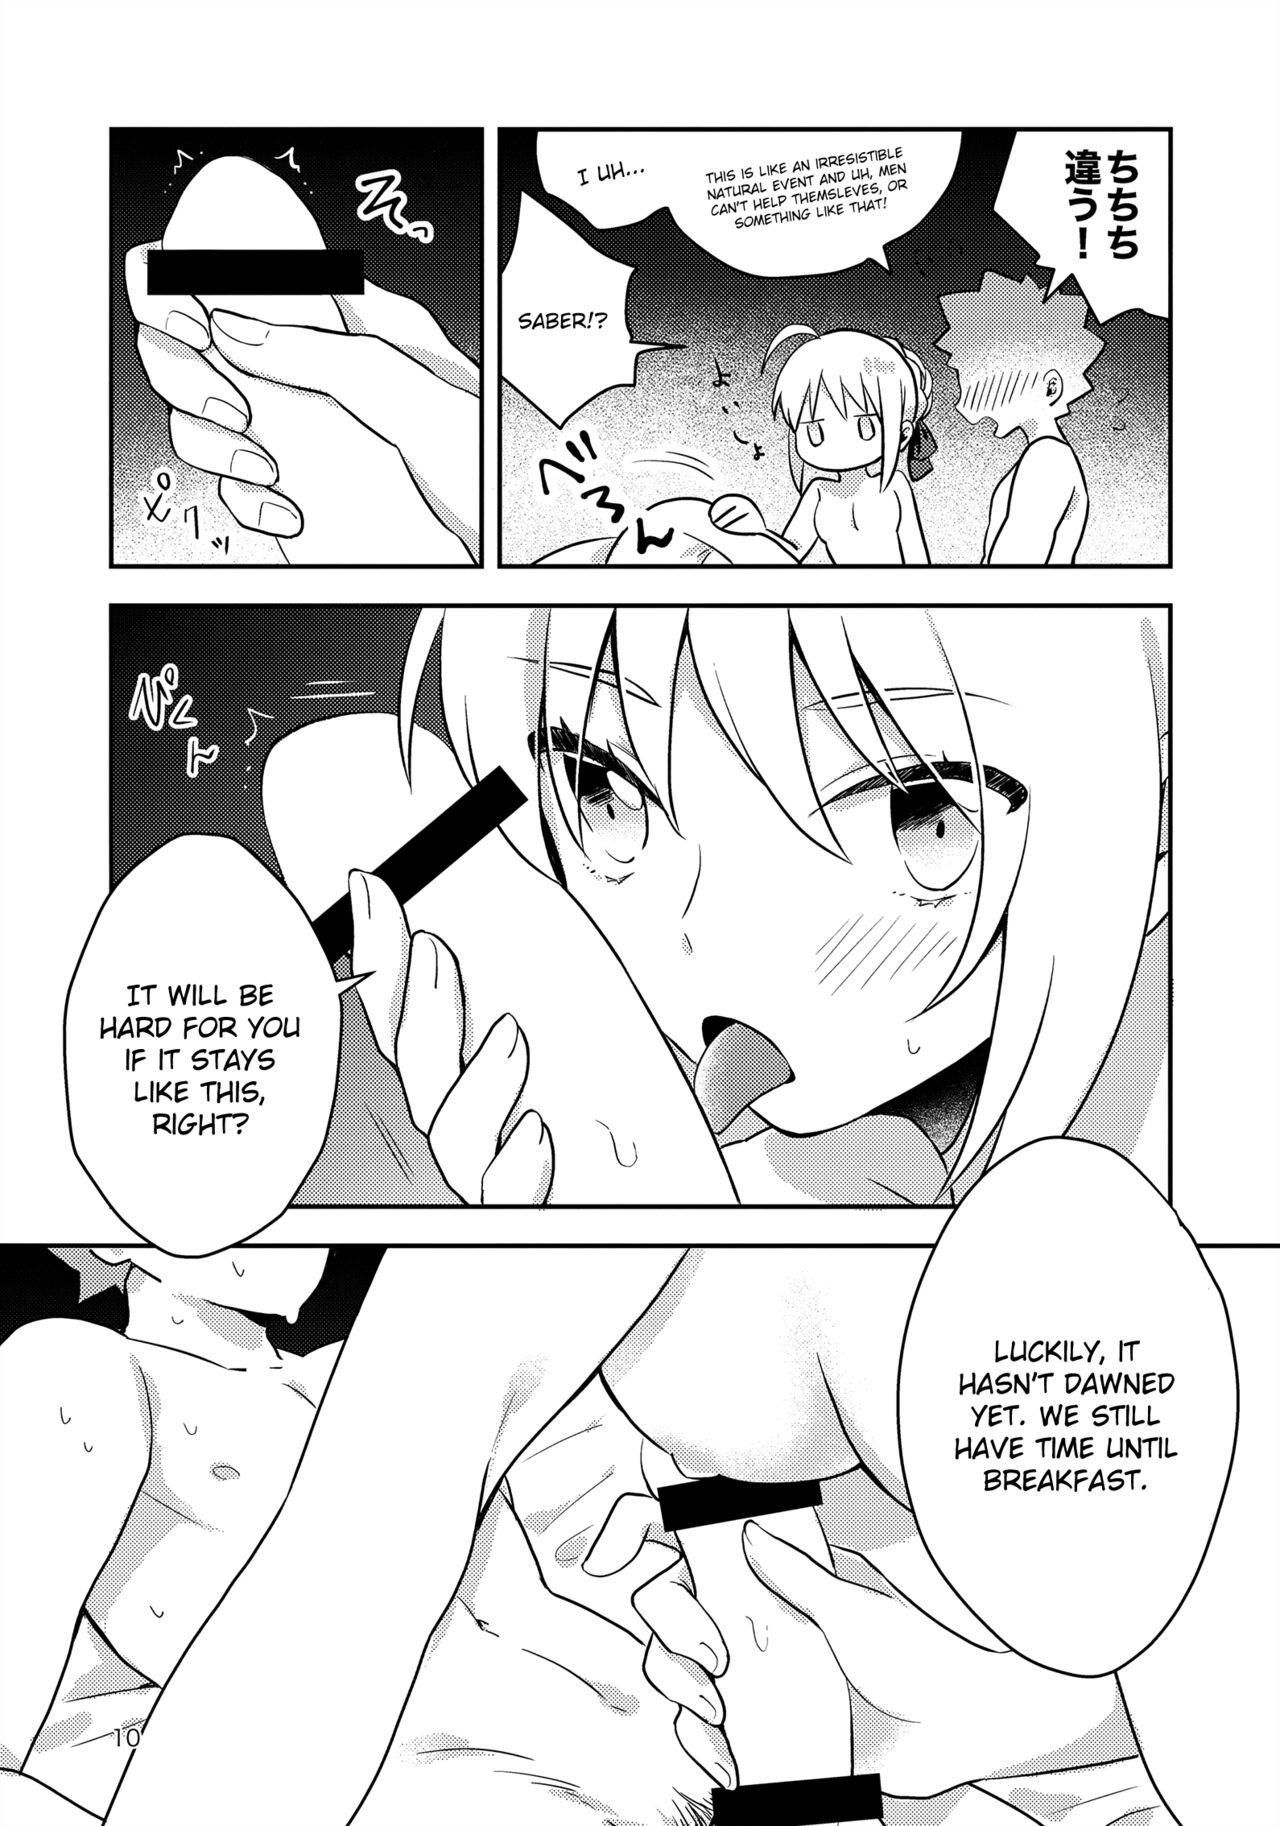 Made Before dawn - Fate stay night Amateur Porn Free - Page 9